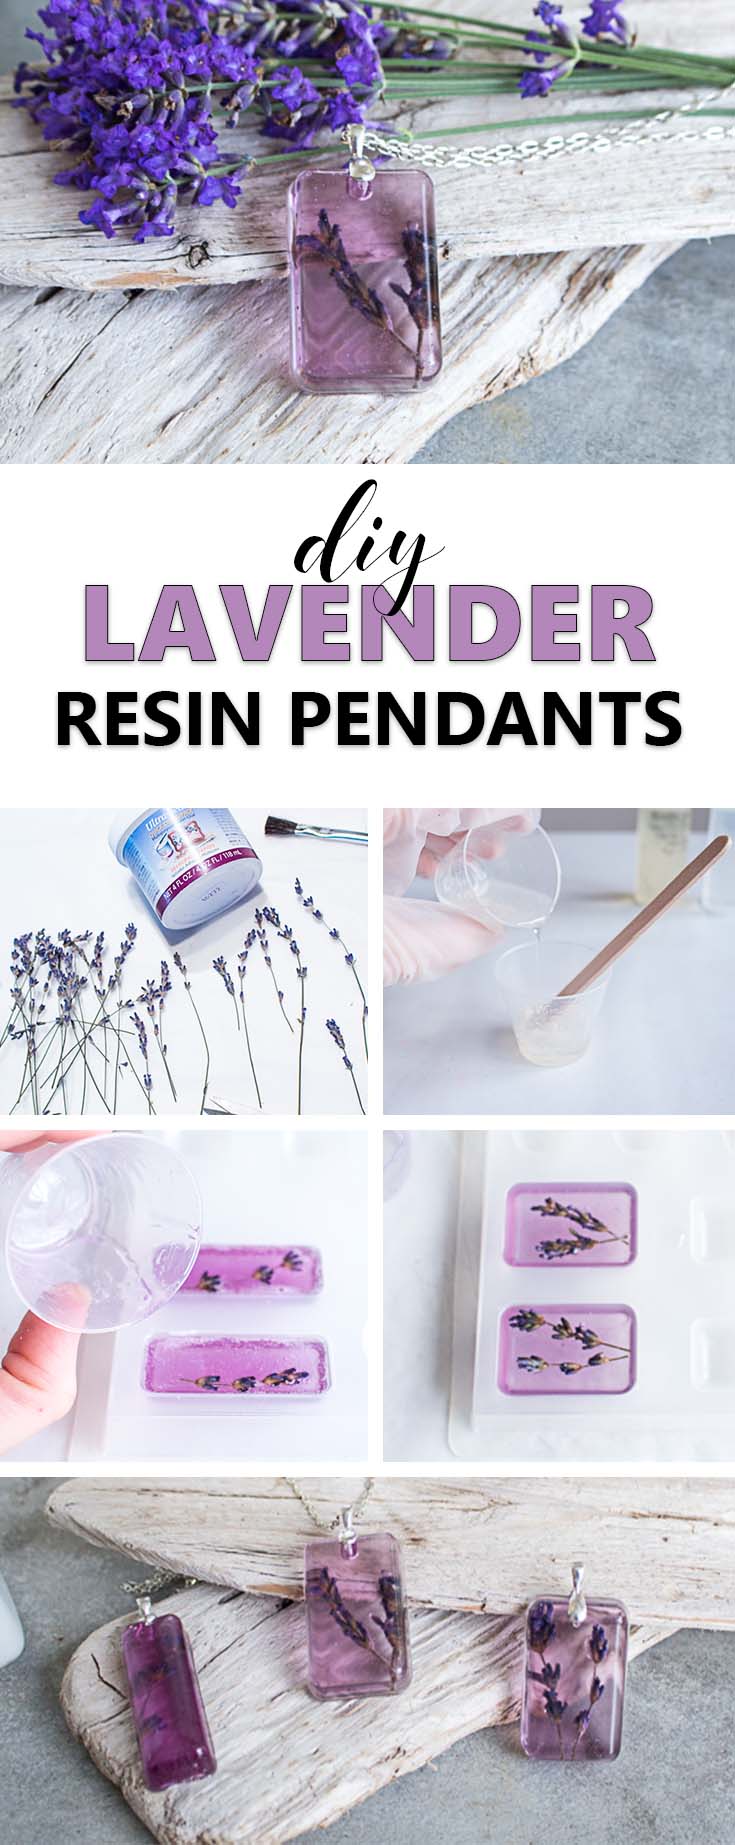 Learn how to create your own beautiful DIY lavender flower pendant using dried lavender blooms and Envirotex Jewelry Resin. via @resincraftsblog